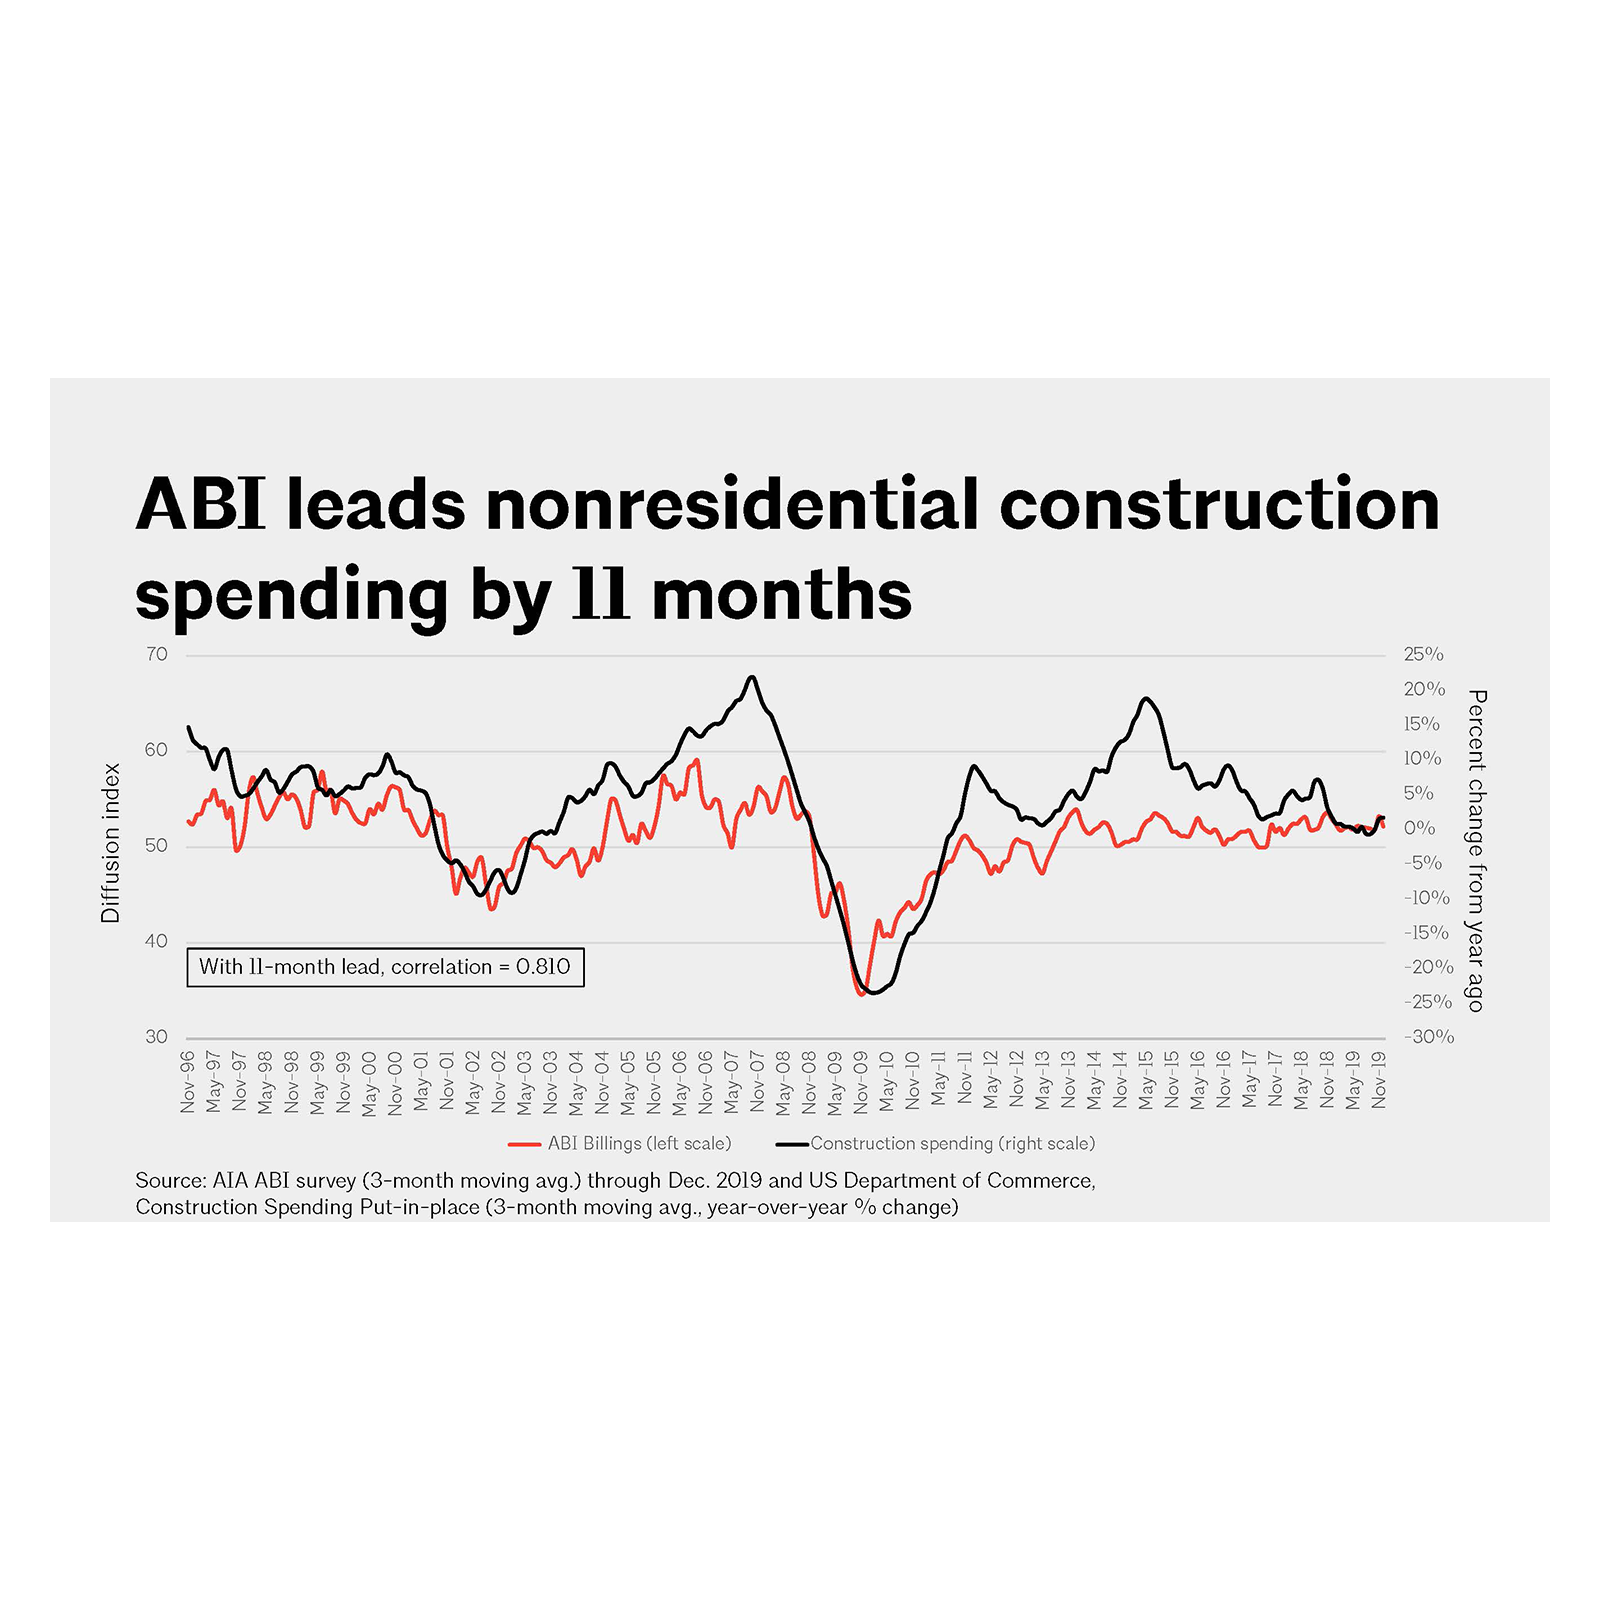 ARCHITECTURAL: Architecture Billing Index, A Key Indicator of Construction Spending